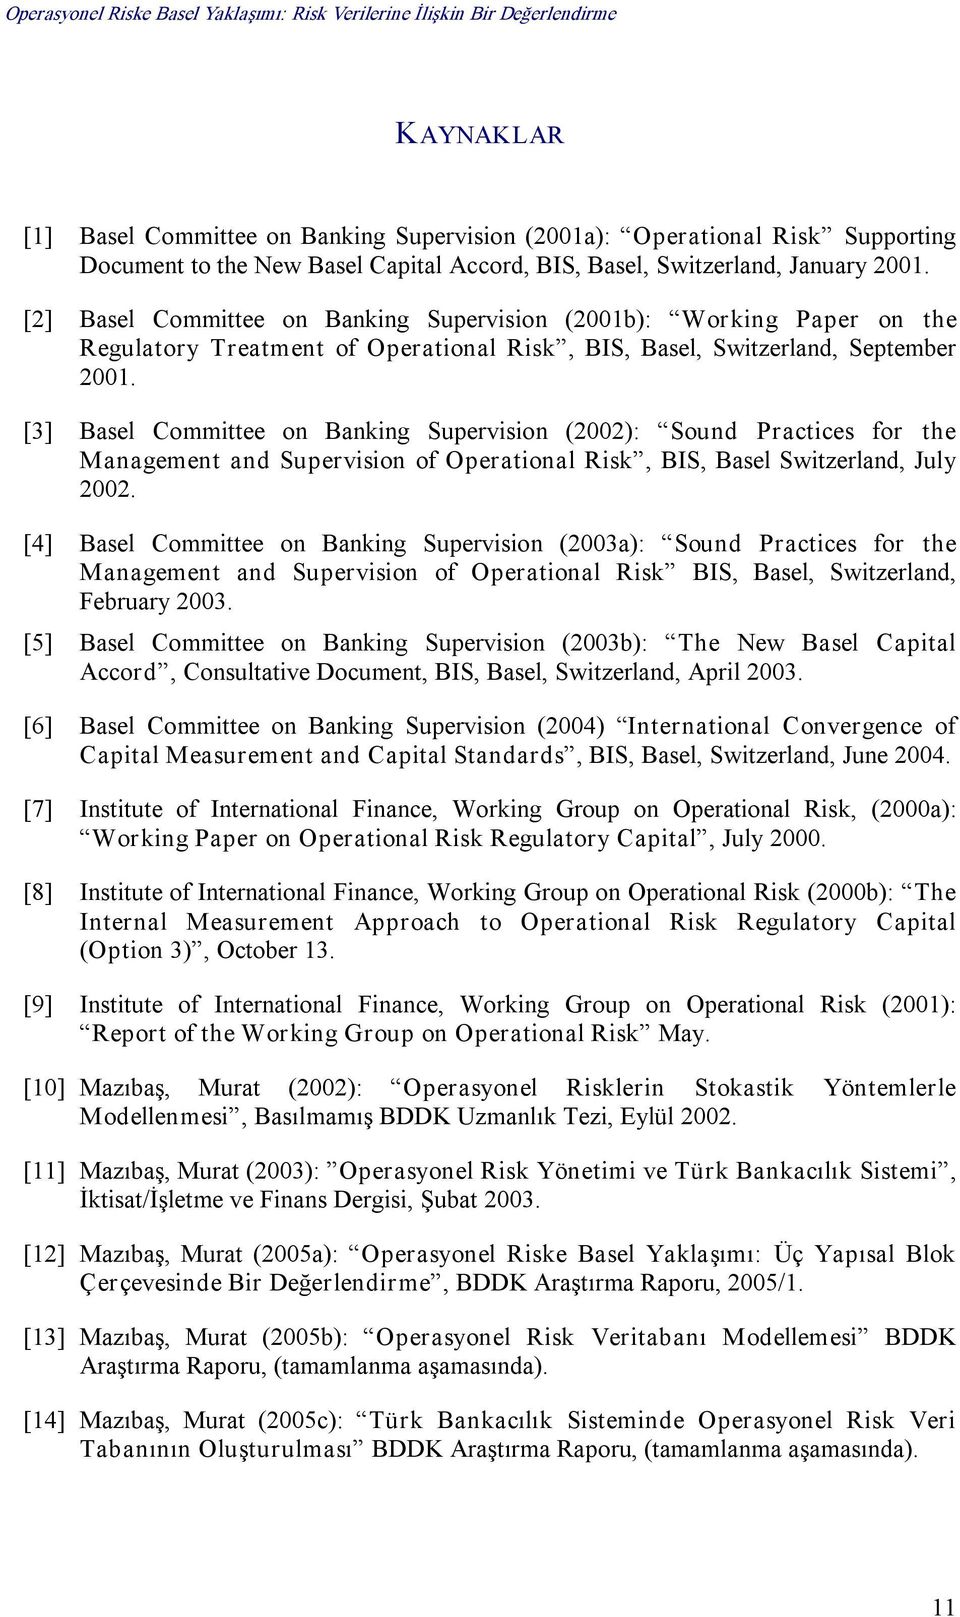 [3] Basel Committee on Banking Supervision (2002): Sound Practices for the Management and Supervision of Operational Risk, BIS, Basel Switzerland, July 2002.